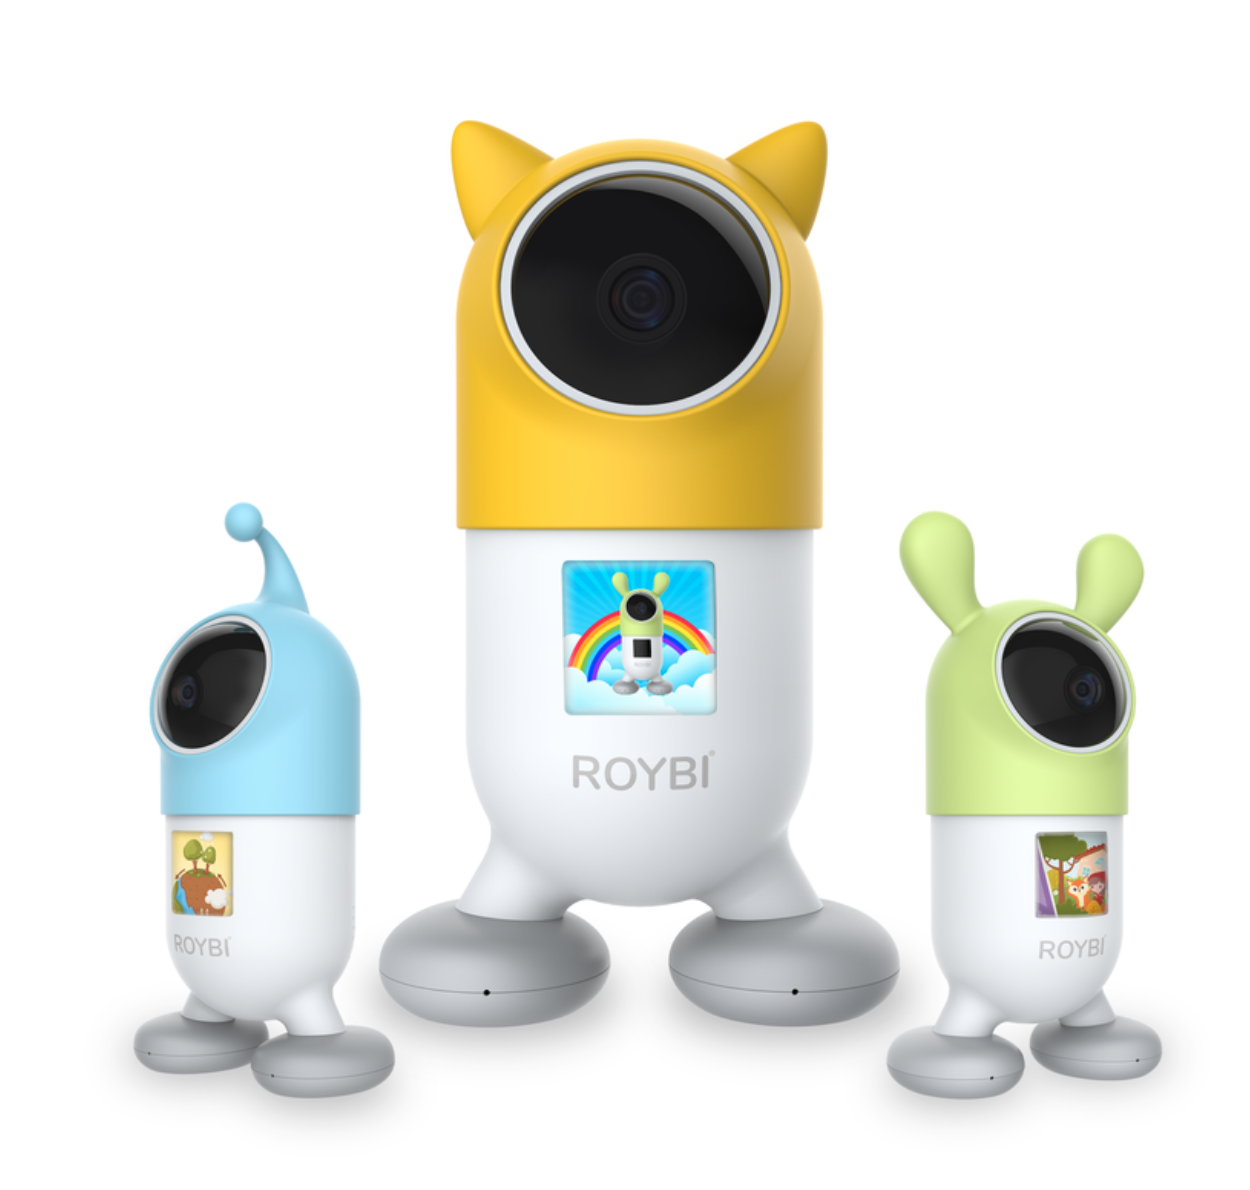 Petra Industries adds ROYBI , children's learning robot, to line-up.